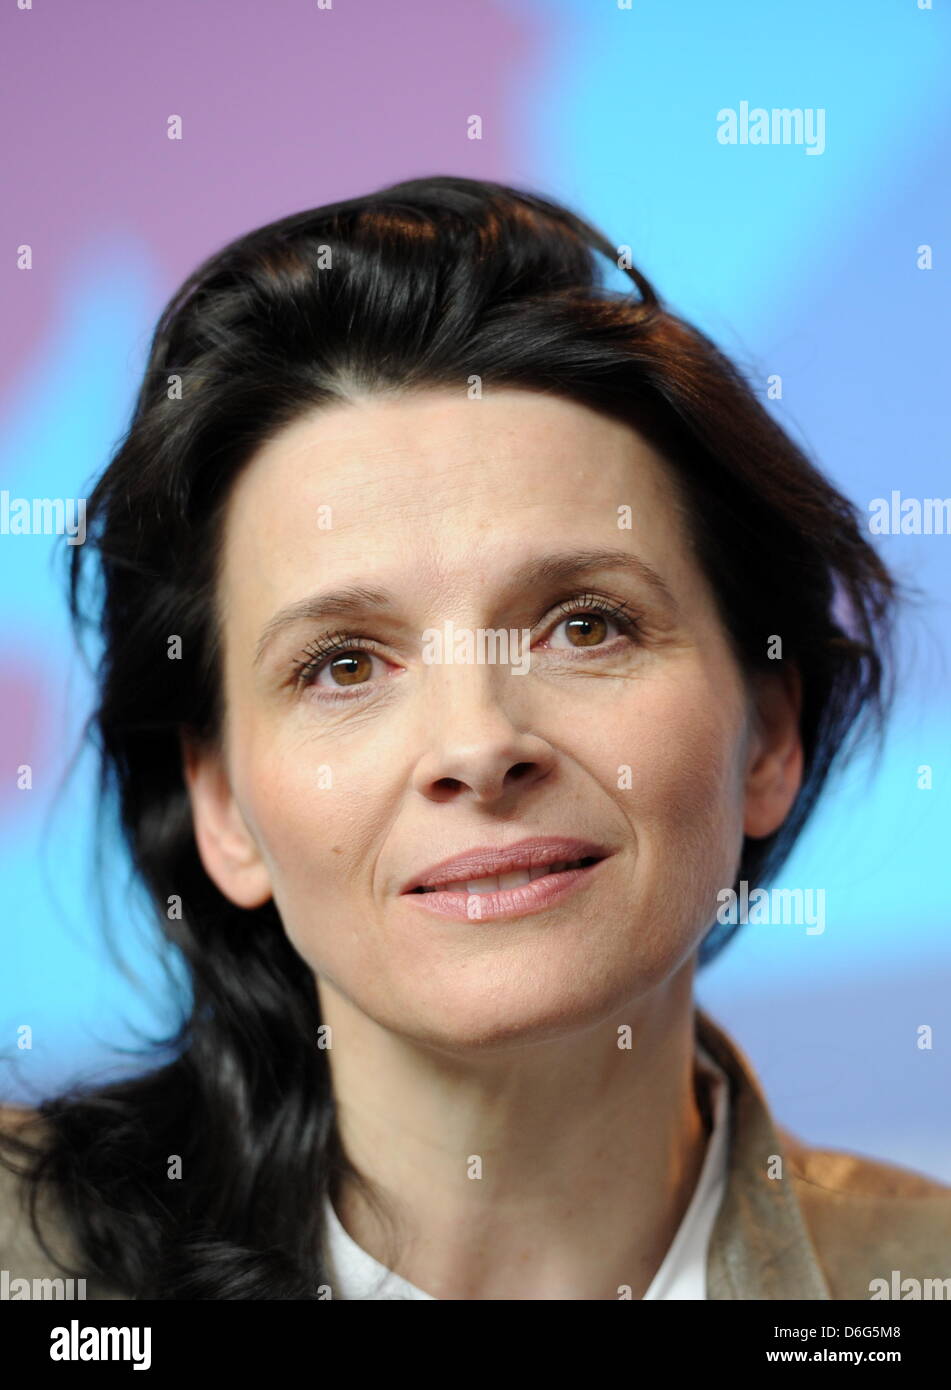 French actress Juliette Binoche attends the press conference for the movie  Elles  during the 62nd Berlin International Film Festival, in Berlin, Germany, 10 February 2012. The movie is presented in the section Panorama Special at the 62nd Berlinale running from 09 to 19 February. Photo: Angelika Warmuth dpa Stock Photo